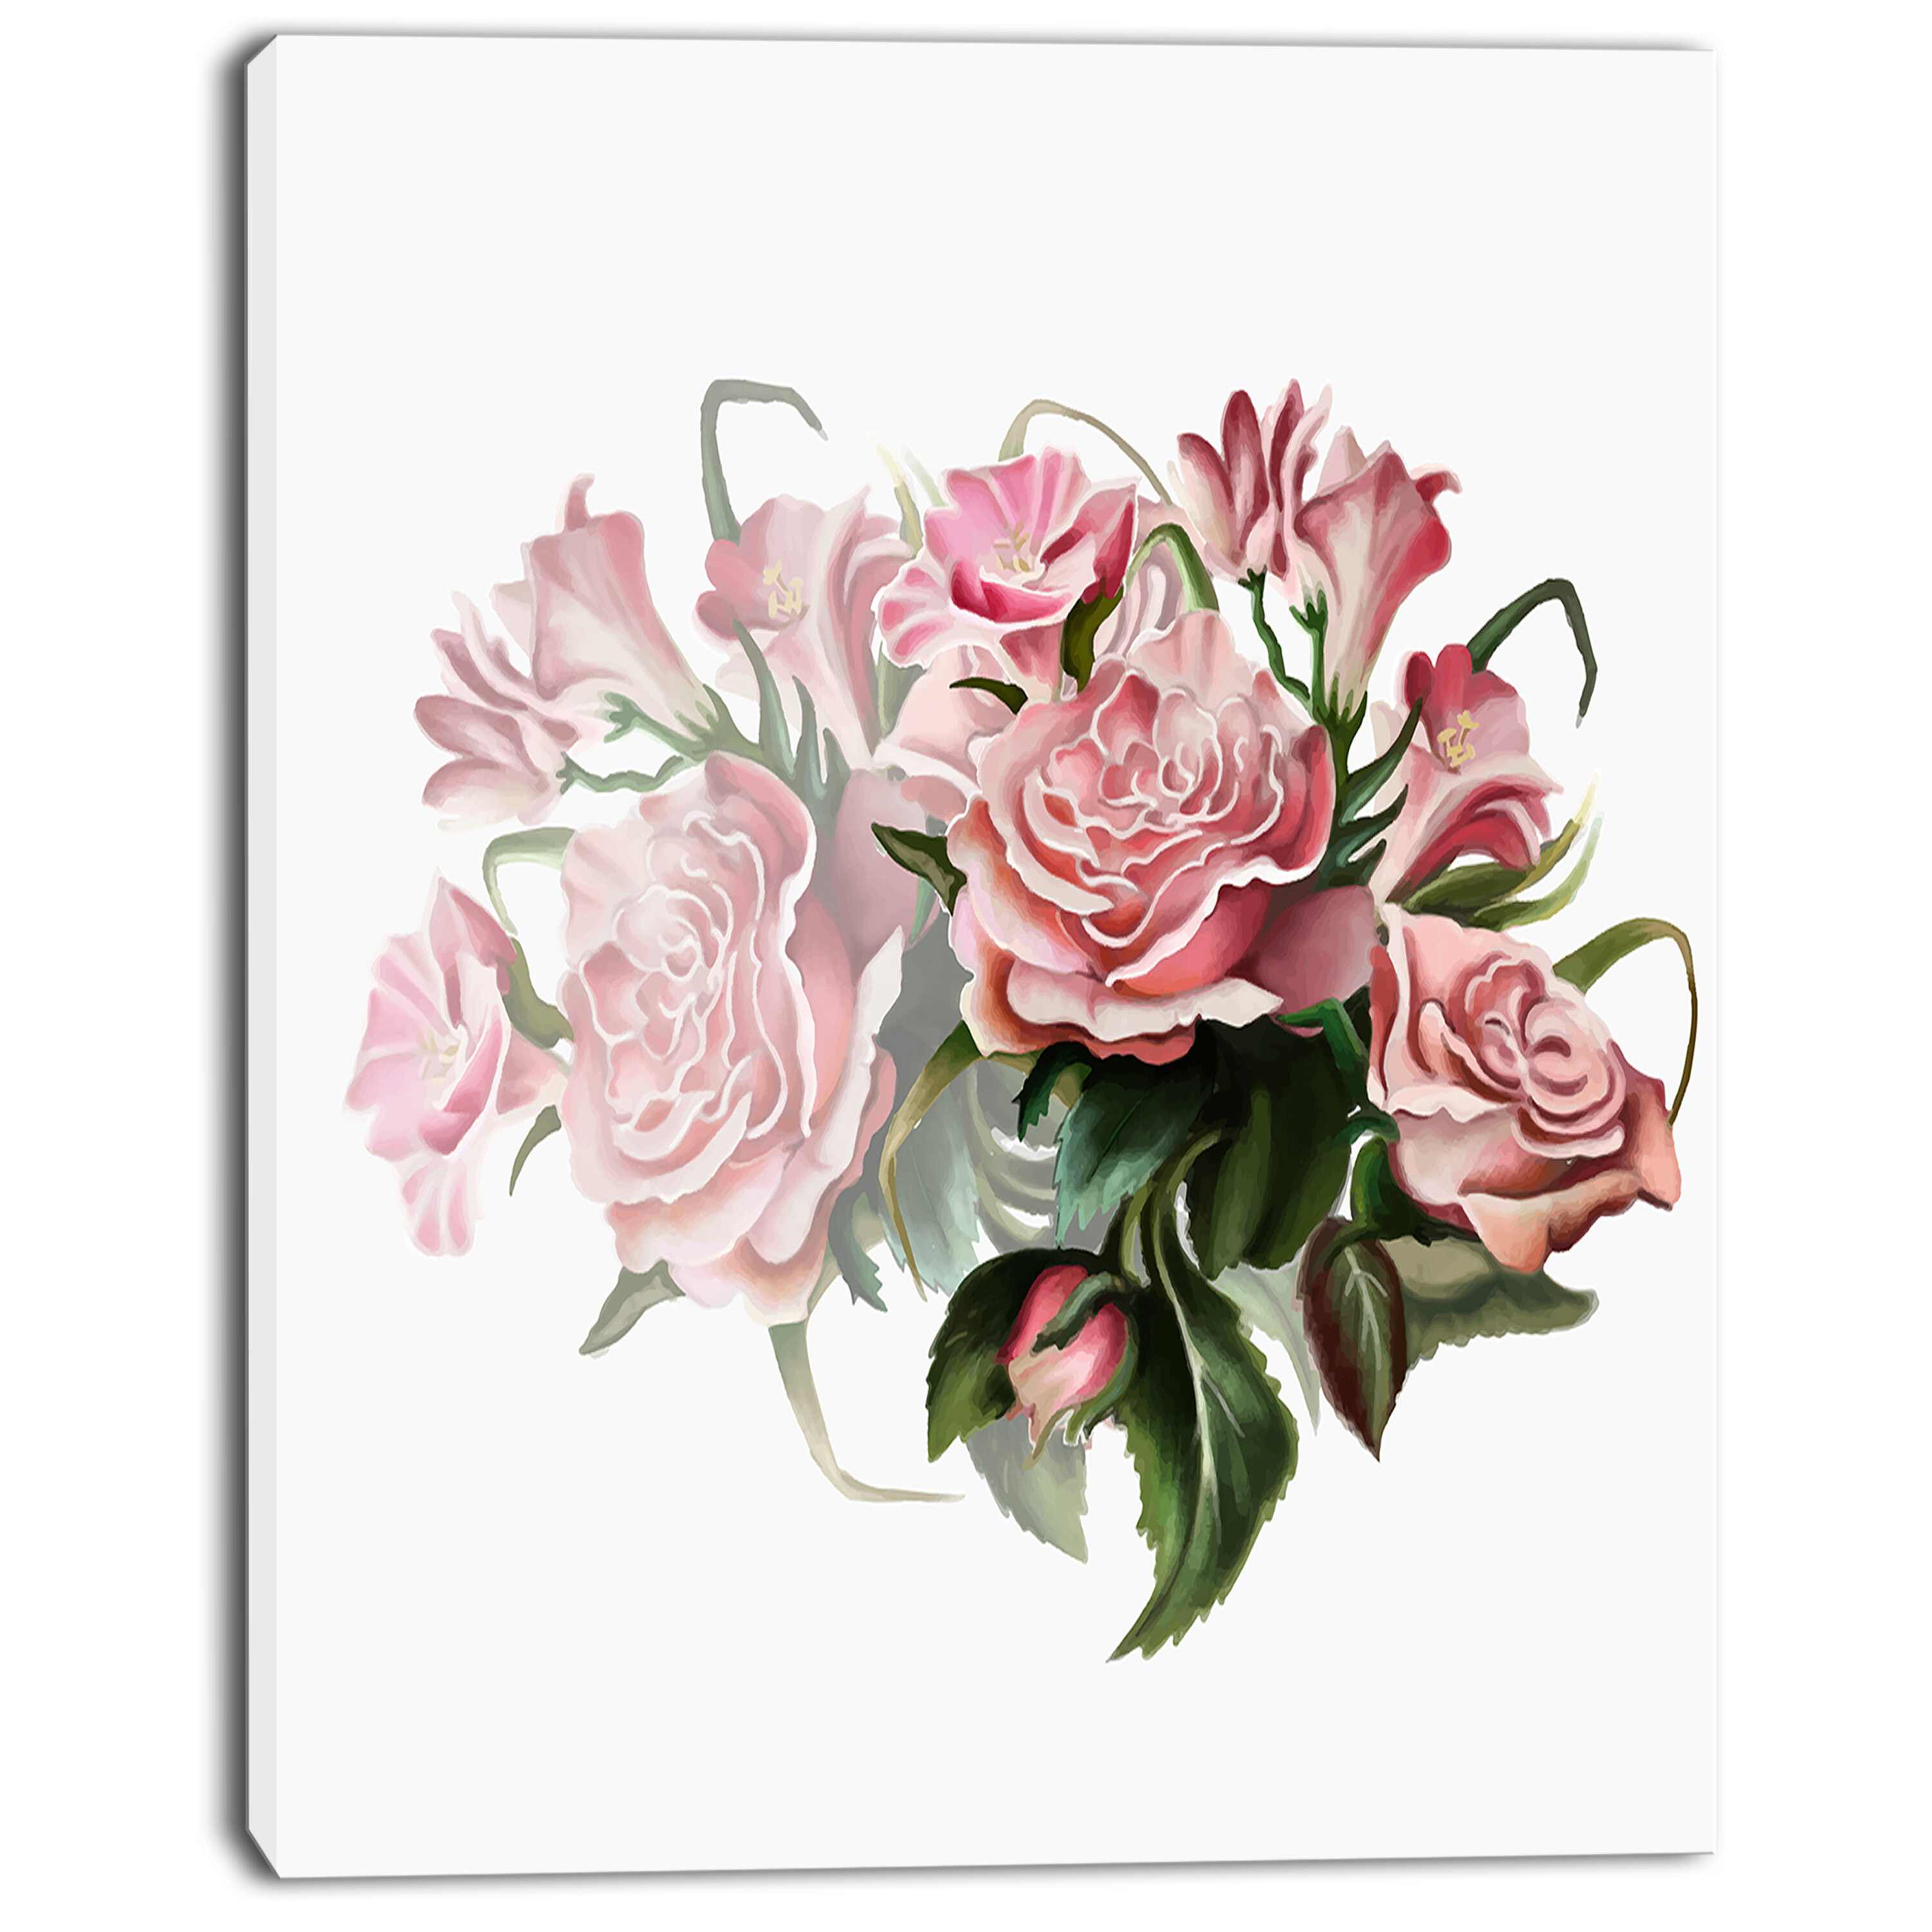 Designart A Blooming Pink Roses Flower In Winter Floral